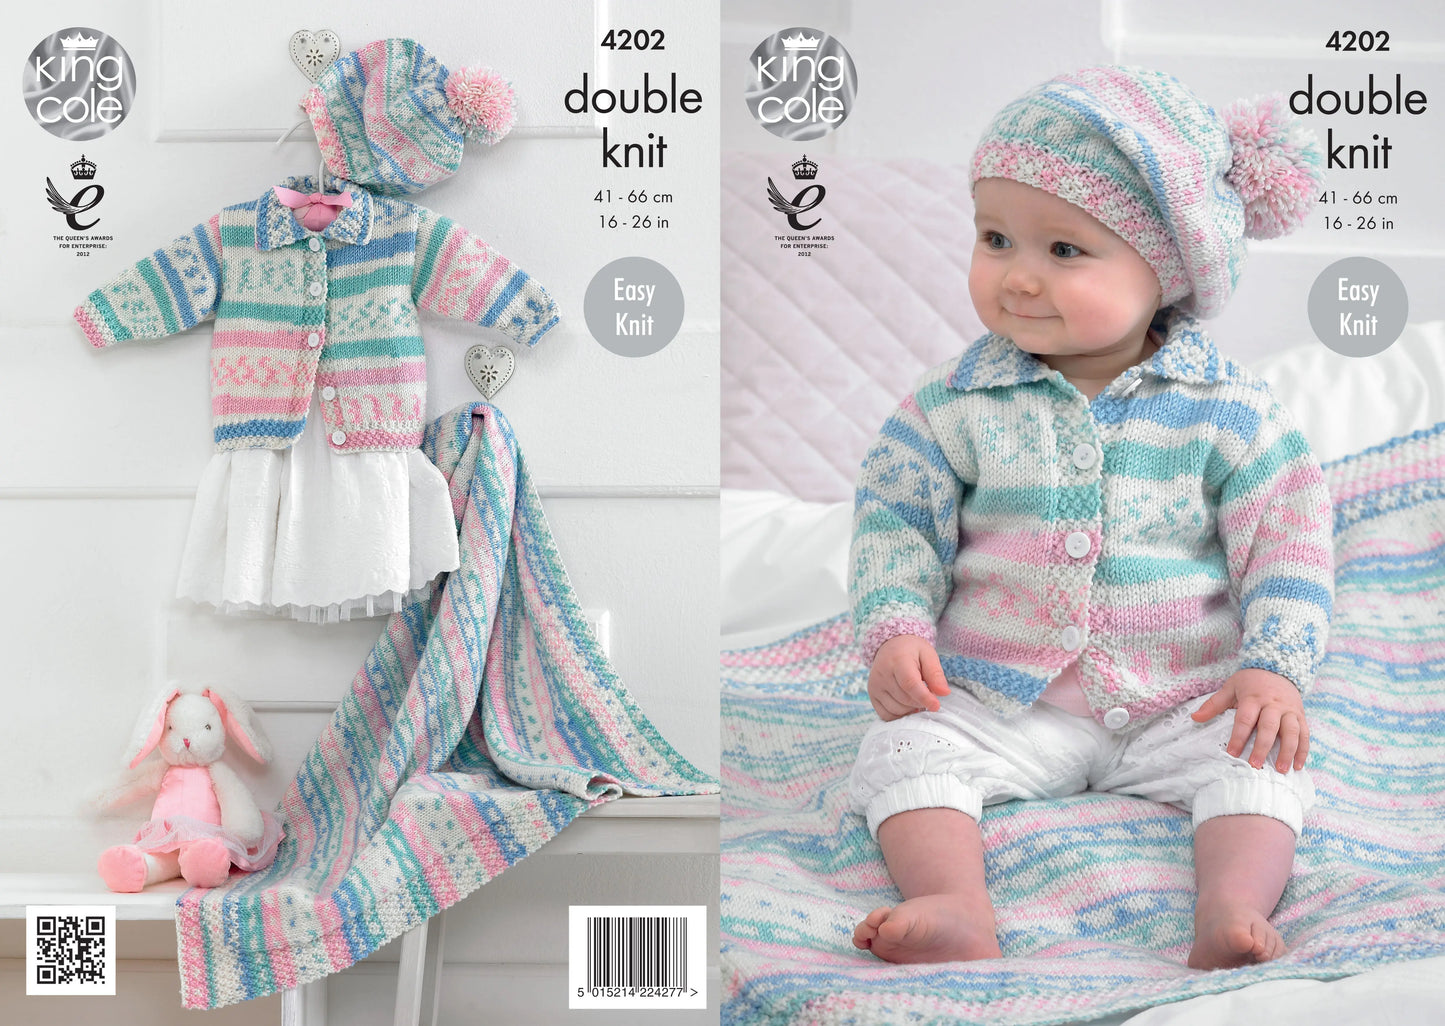 King Cole Babies’ Cardigan, Blanket and Beret Knitted in Cherish DK 4202